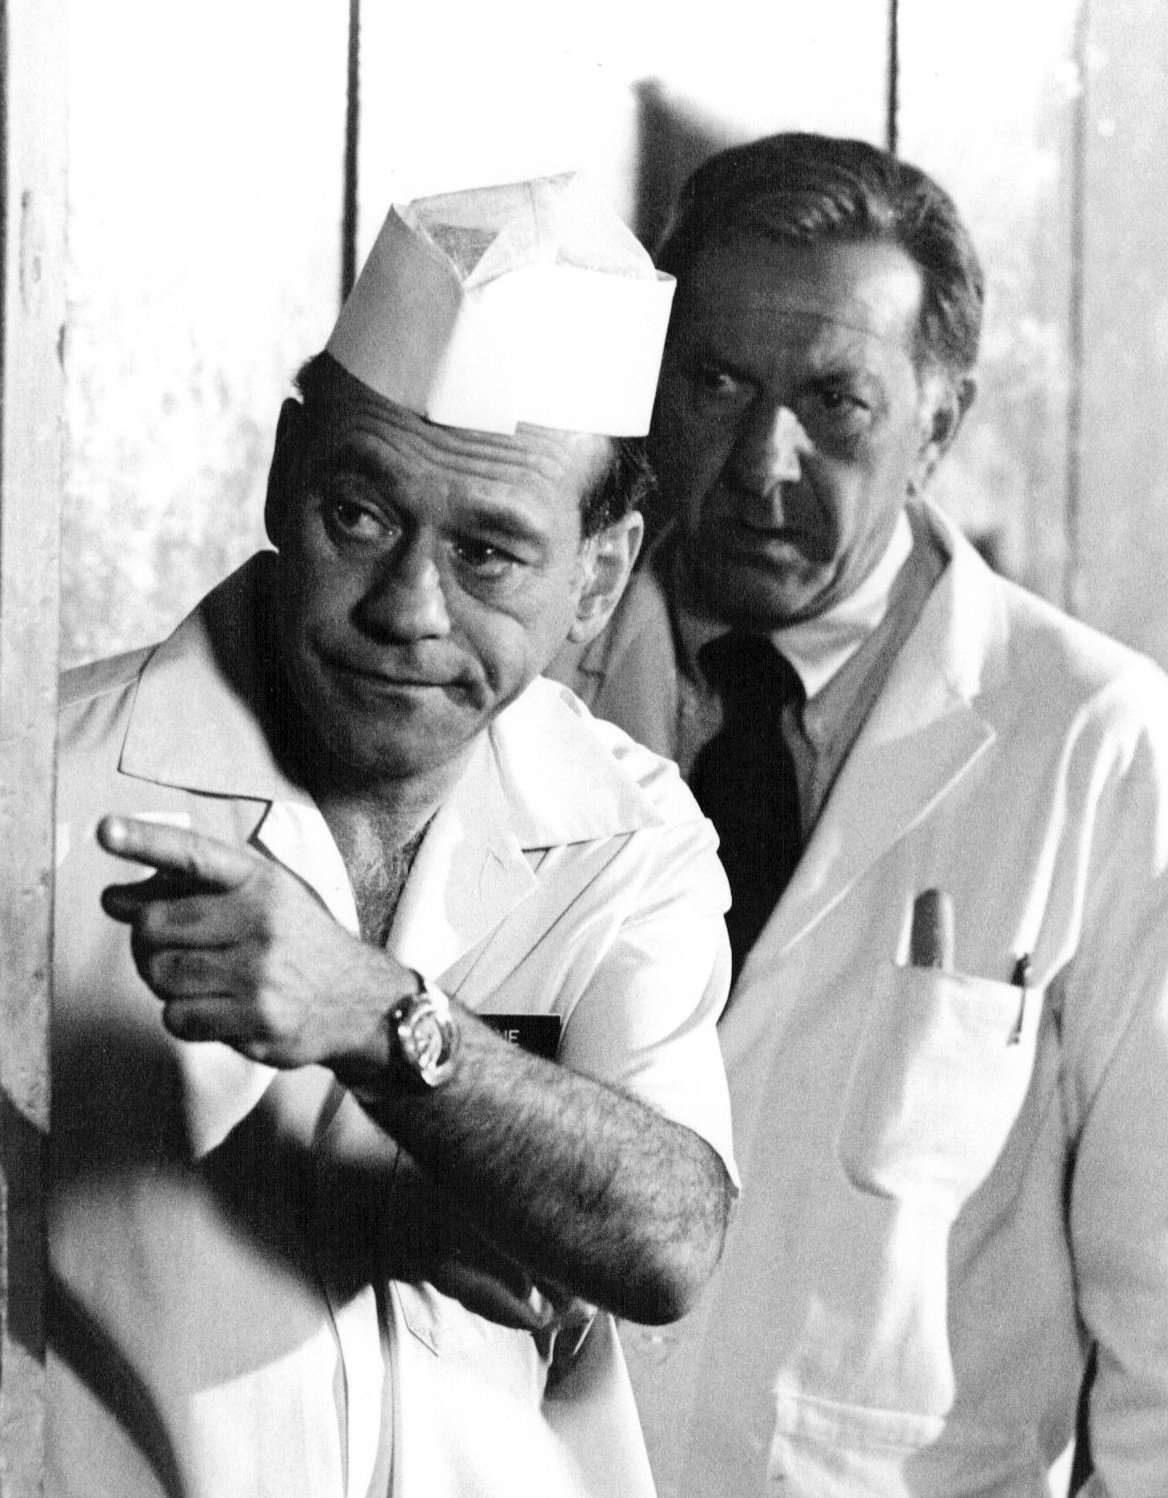 Jack Klugman and Wynn Irwin from the television drama "Quincy M. E." | Source: Wikimedia Commons